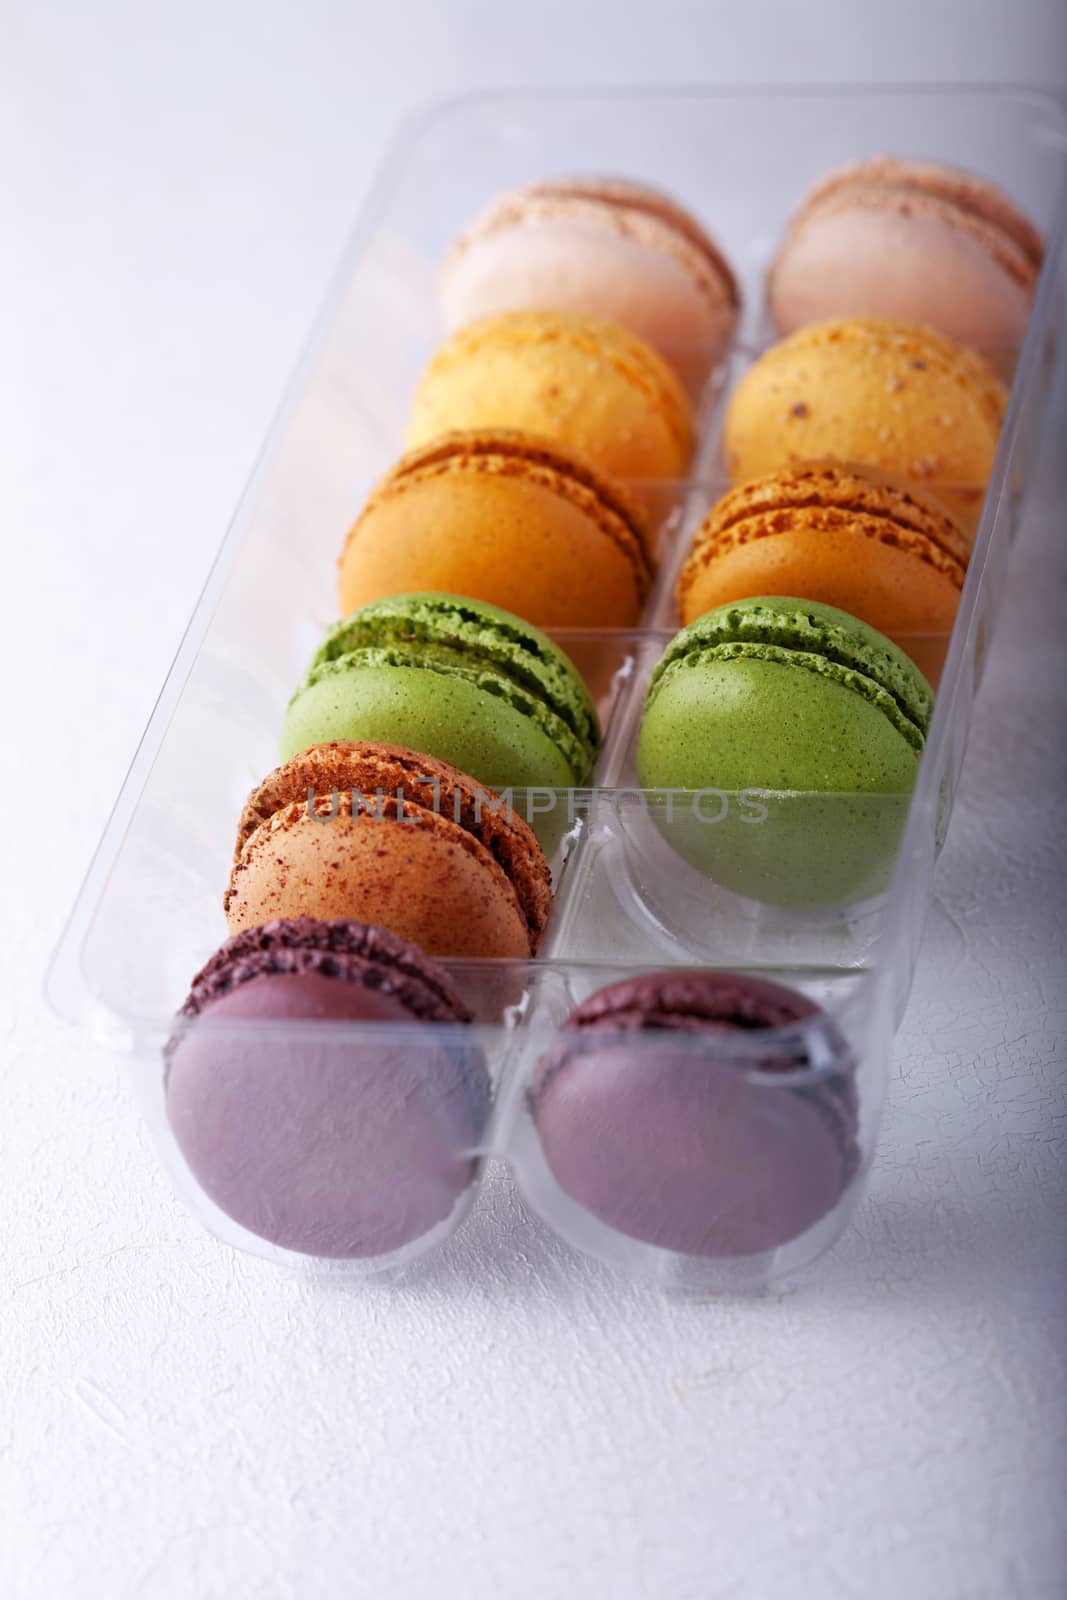 Multicolored Almond cookies Macaroons in Box by supercat67